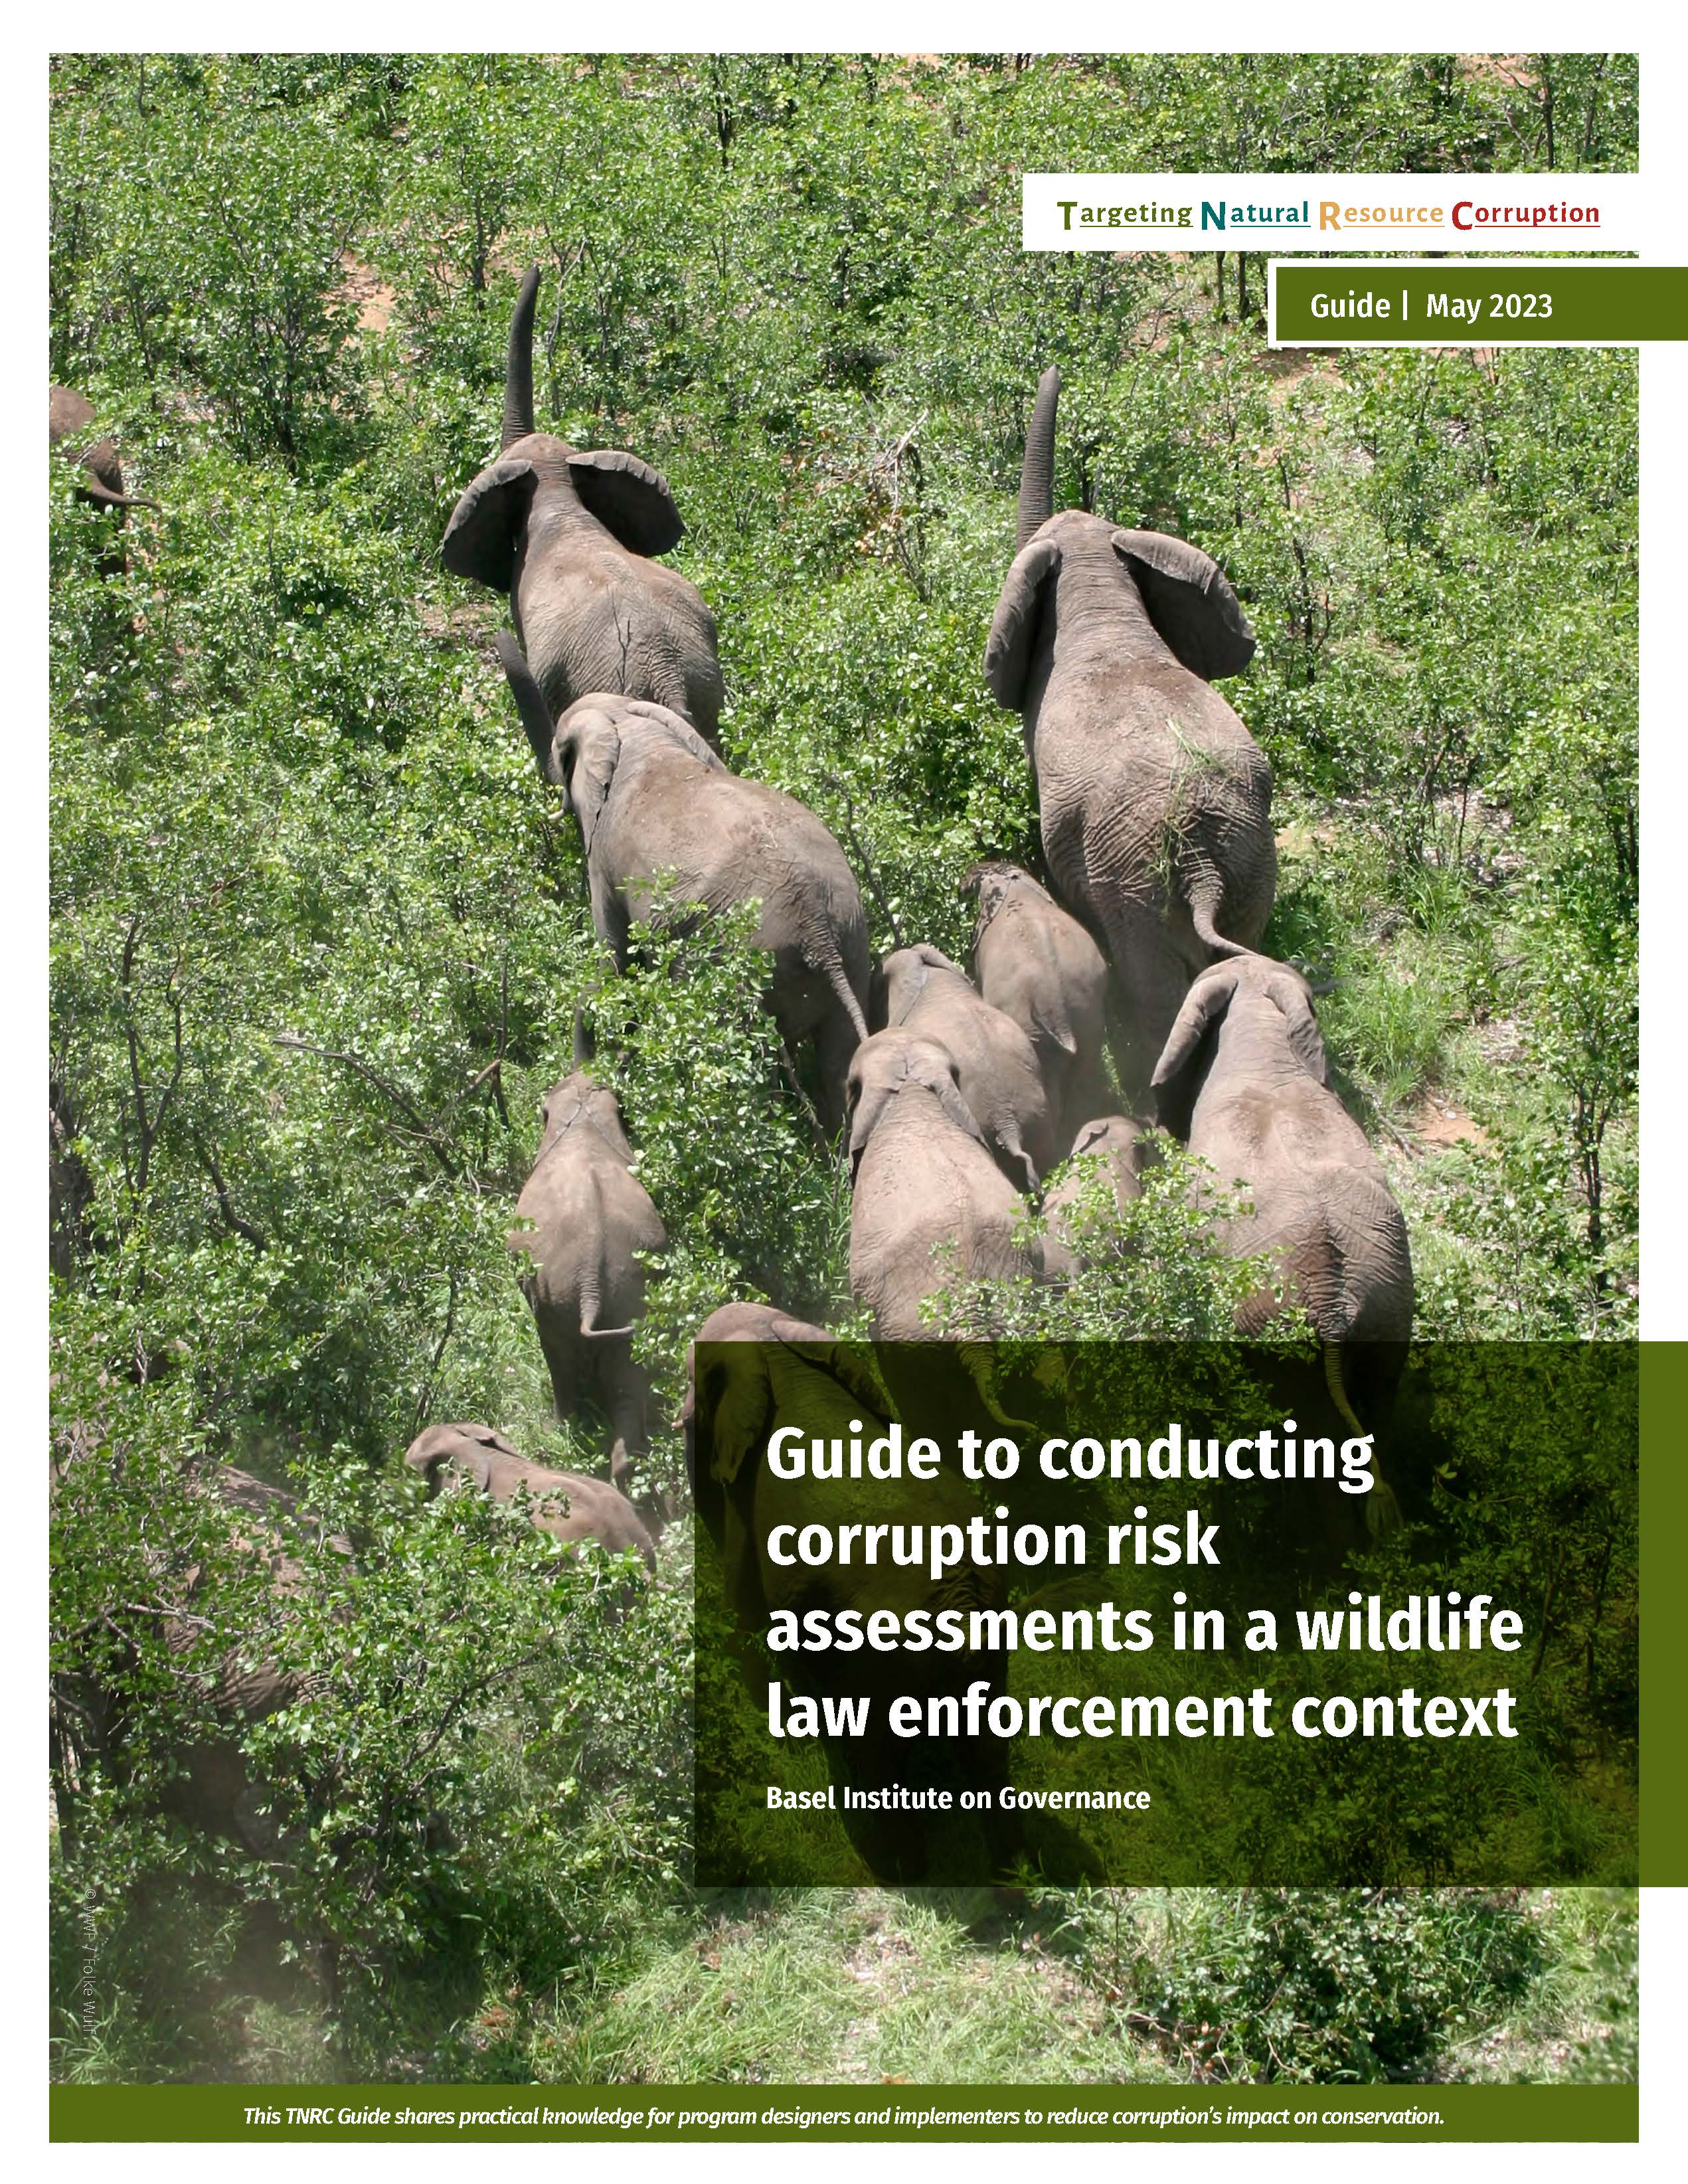 Cover page of how-to guide to corruption risk assessments